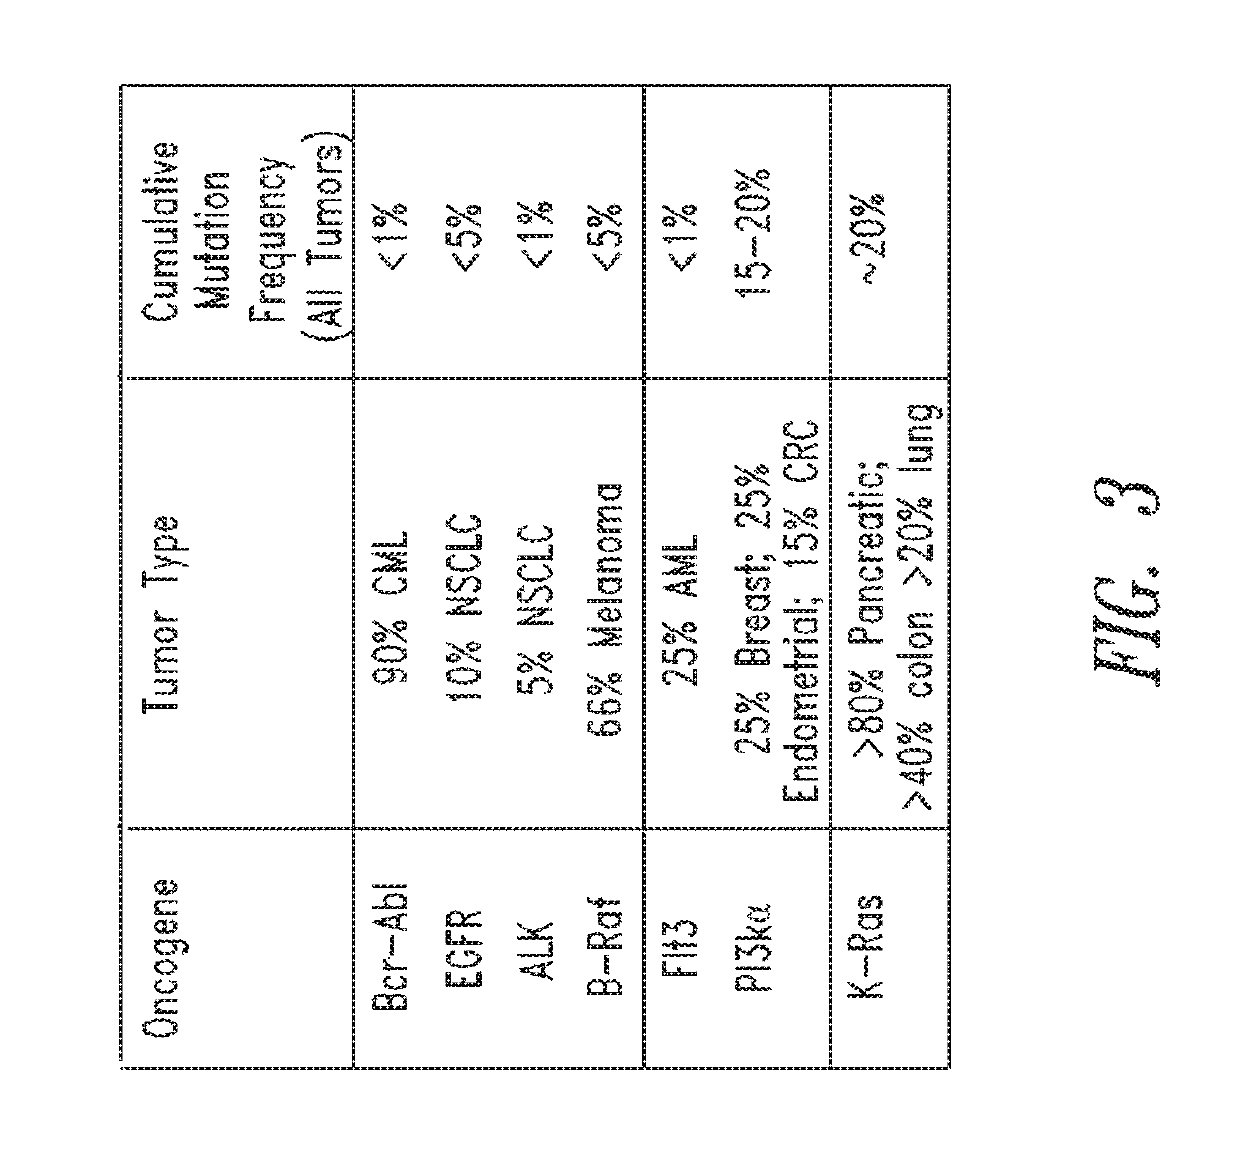 Inhibitors of RAS and methods of use thereof